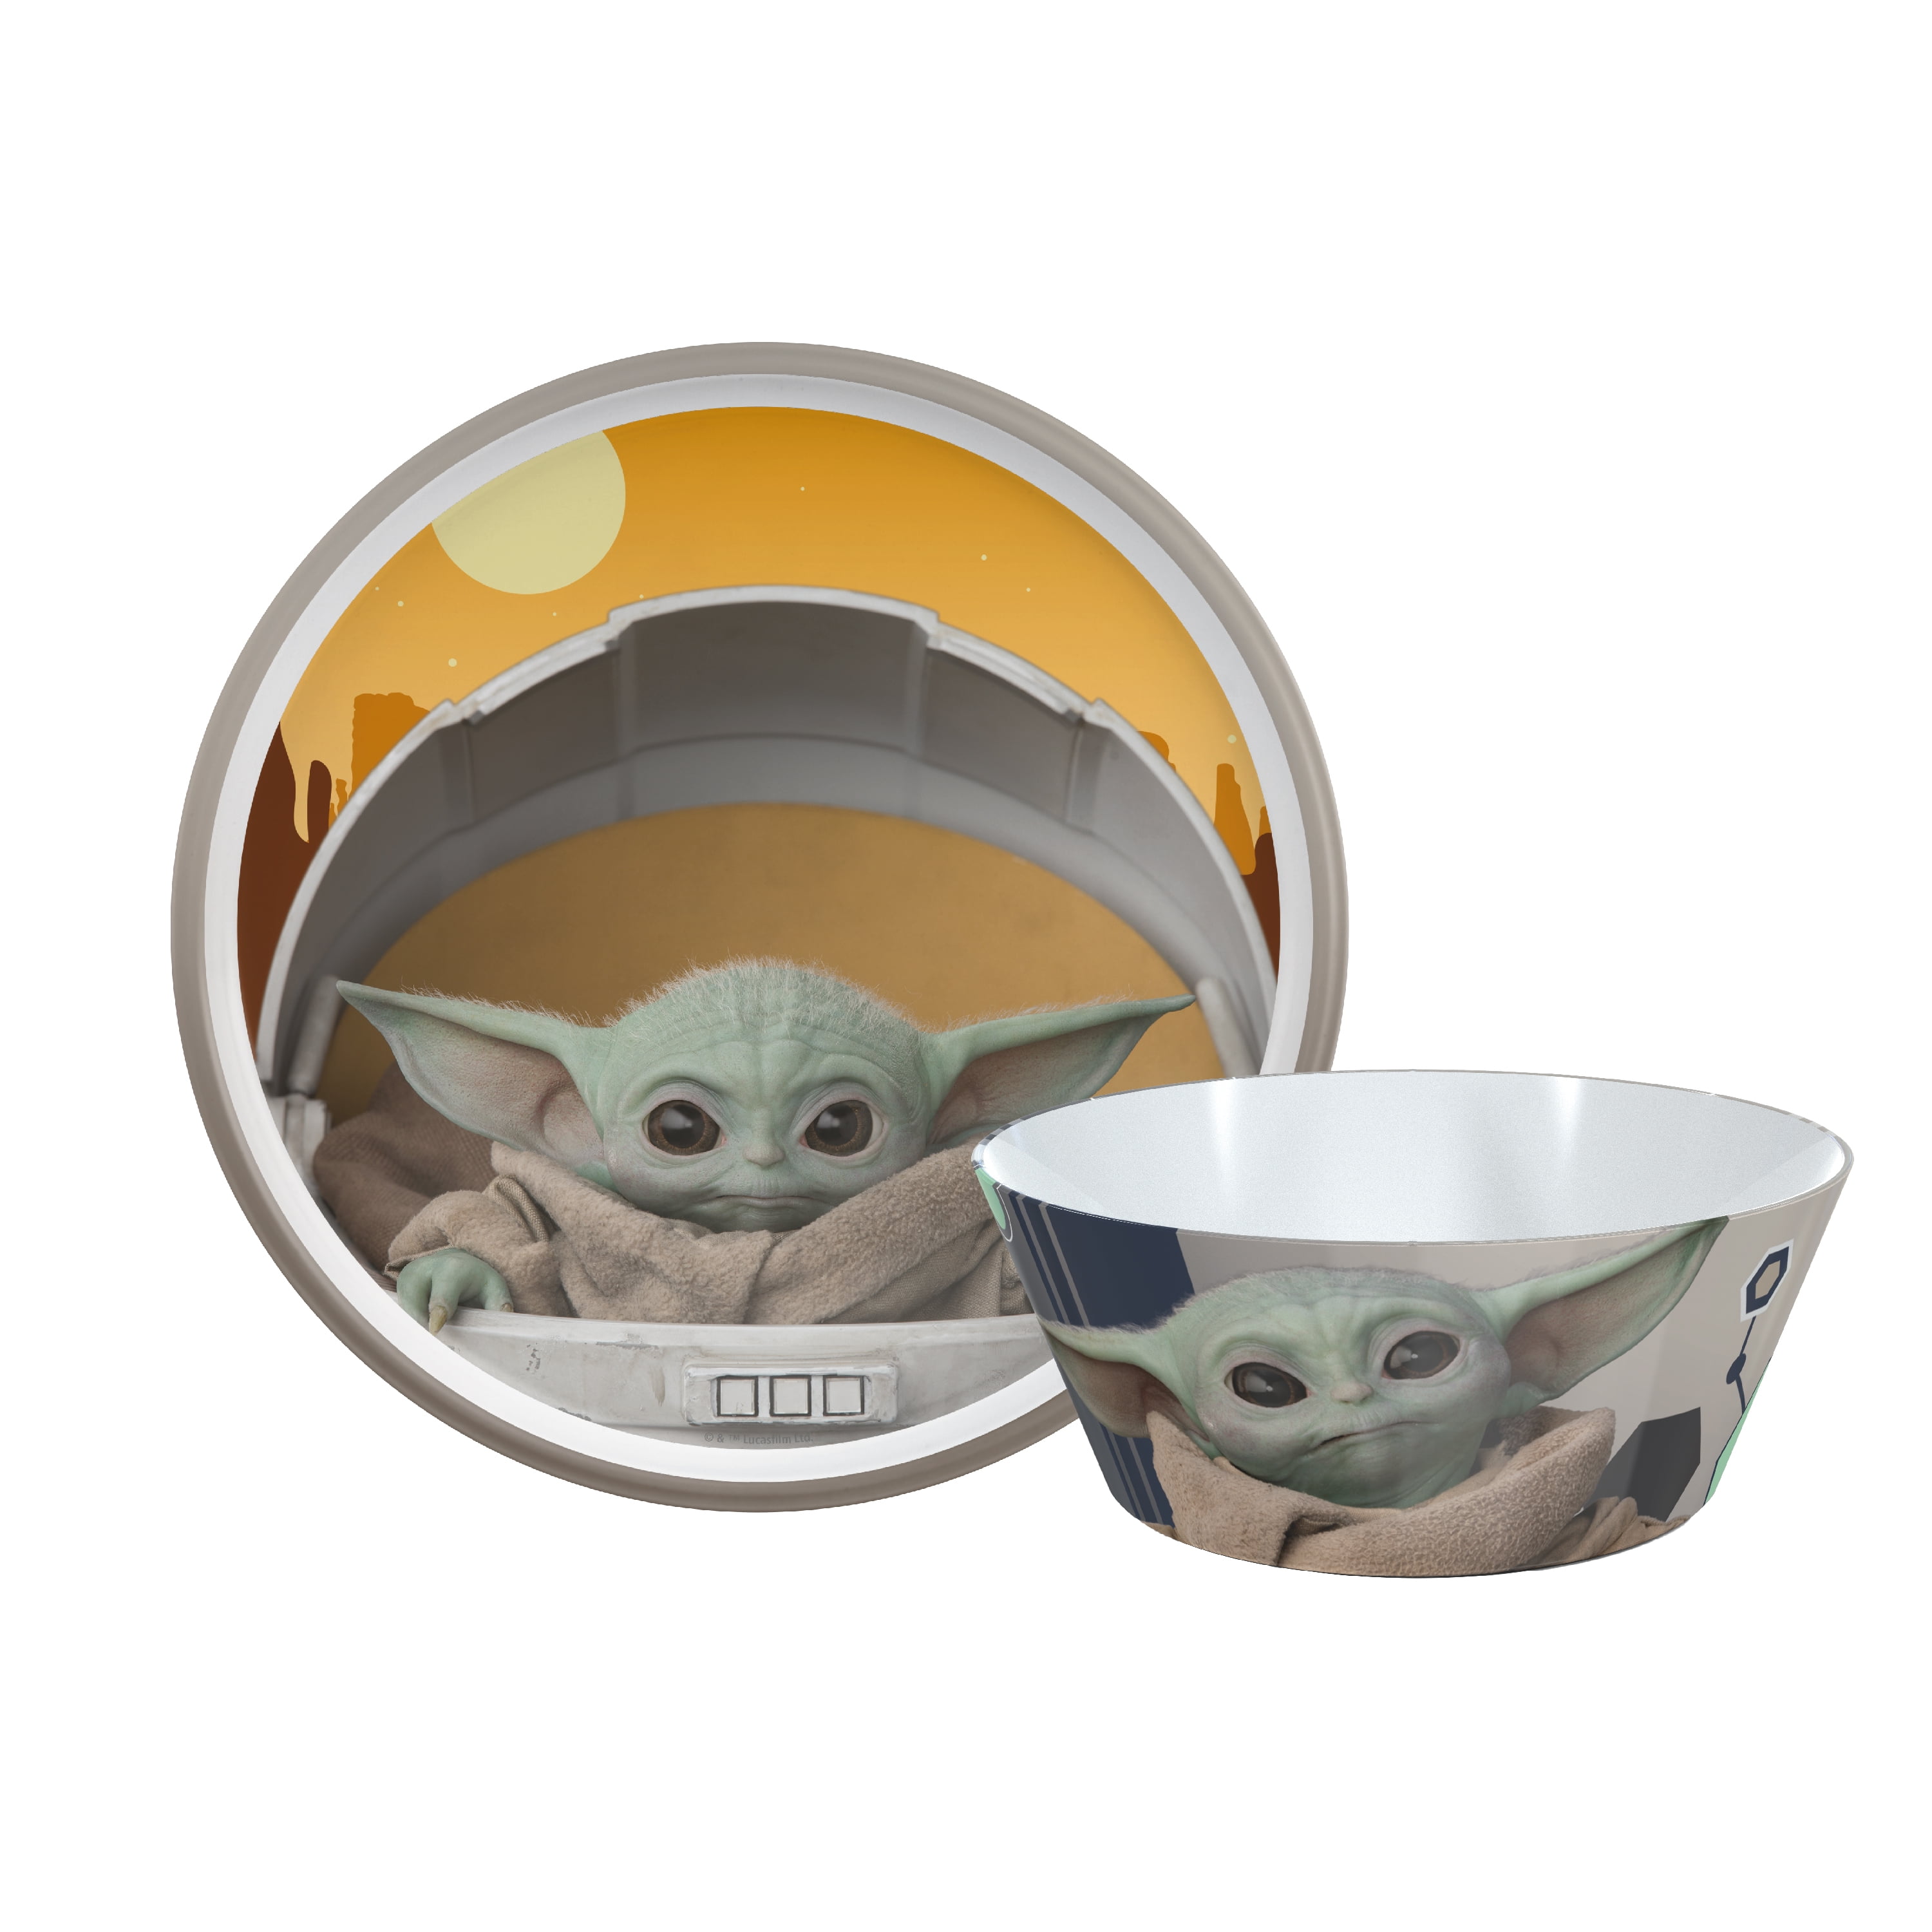 Disney Parks Star Wars Yoda Plastic Stacking Meal Set Bowl Plate Cup